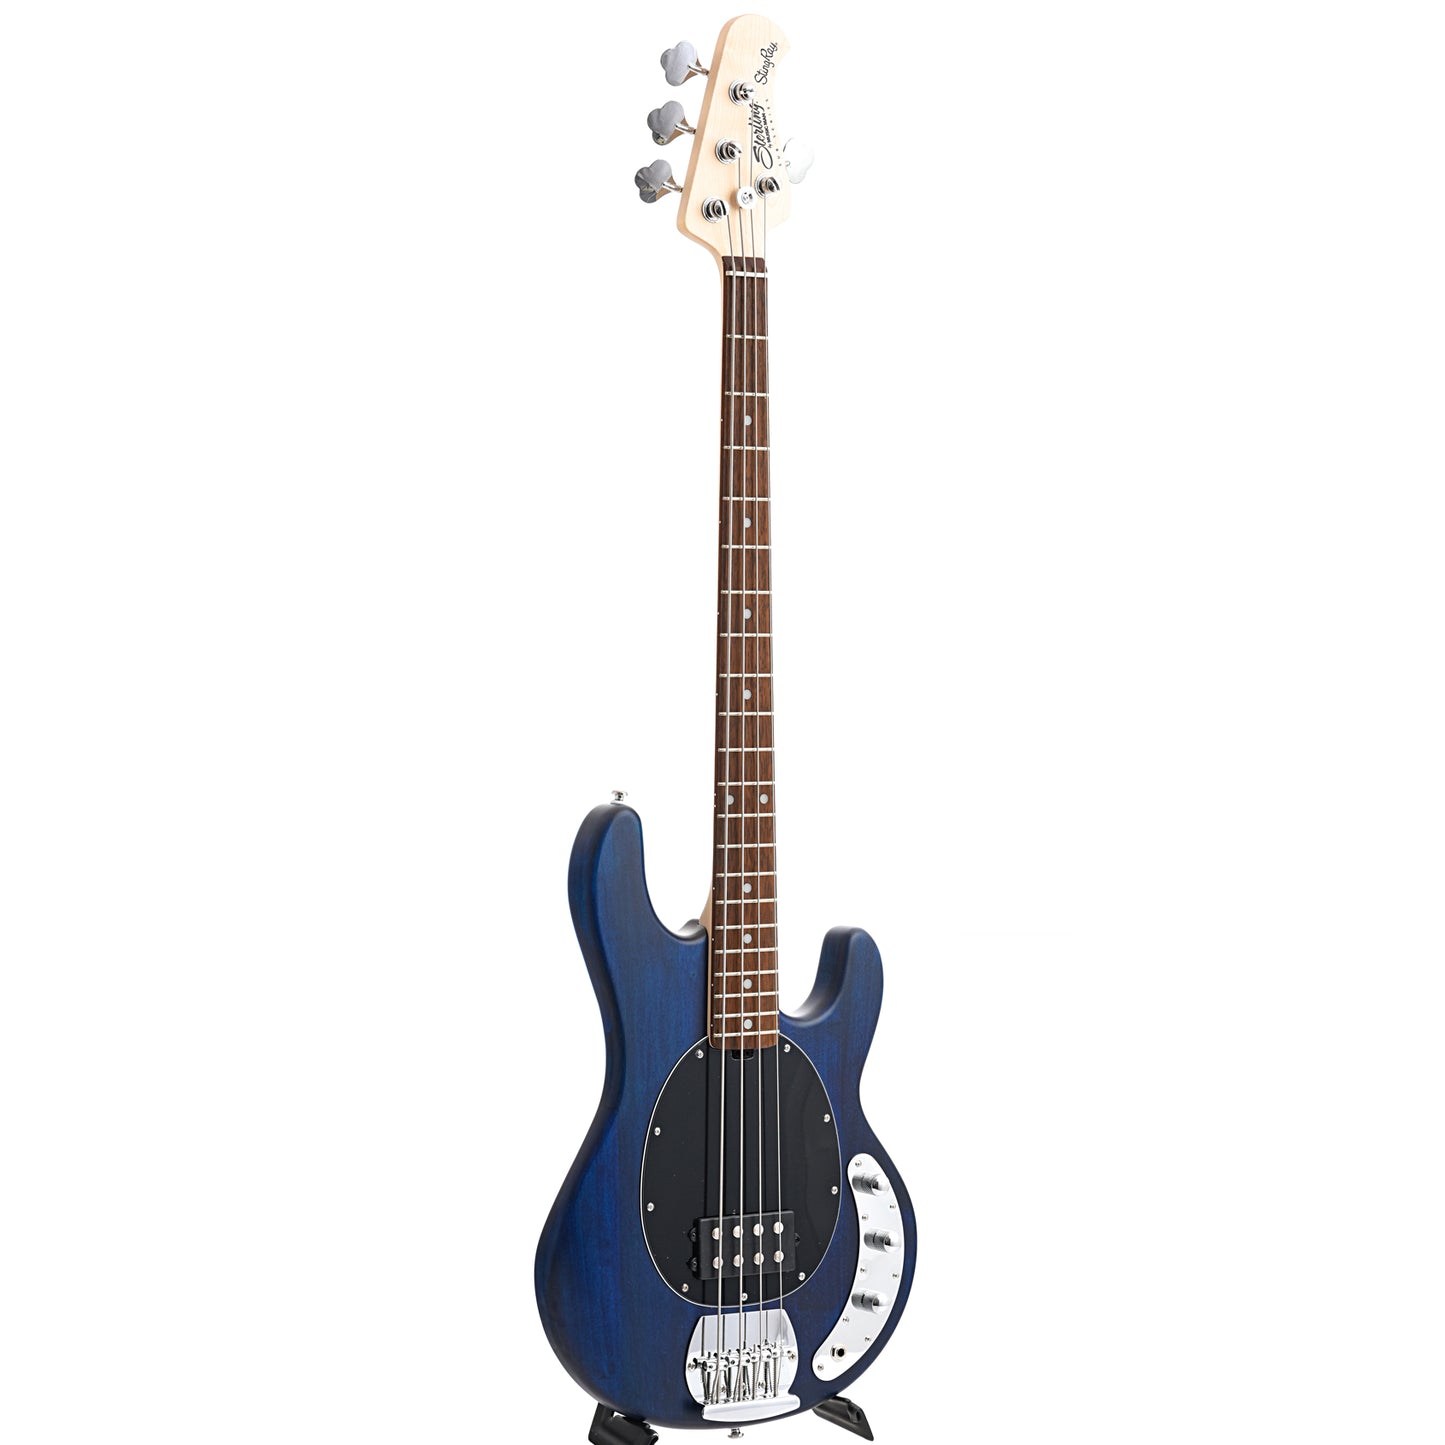 Image 11 of Sterling by Music Man StingRay 4 Bass, Trans Blue Satin Finish - SKU# RAY4-TBS : Product Type Solid Body Bass Guitars : Elderly Instruments